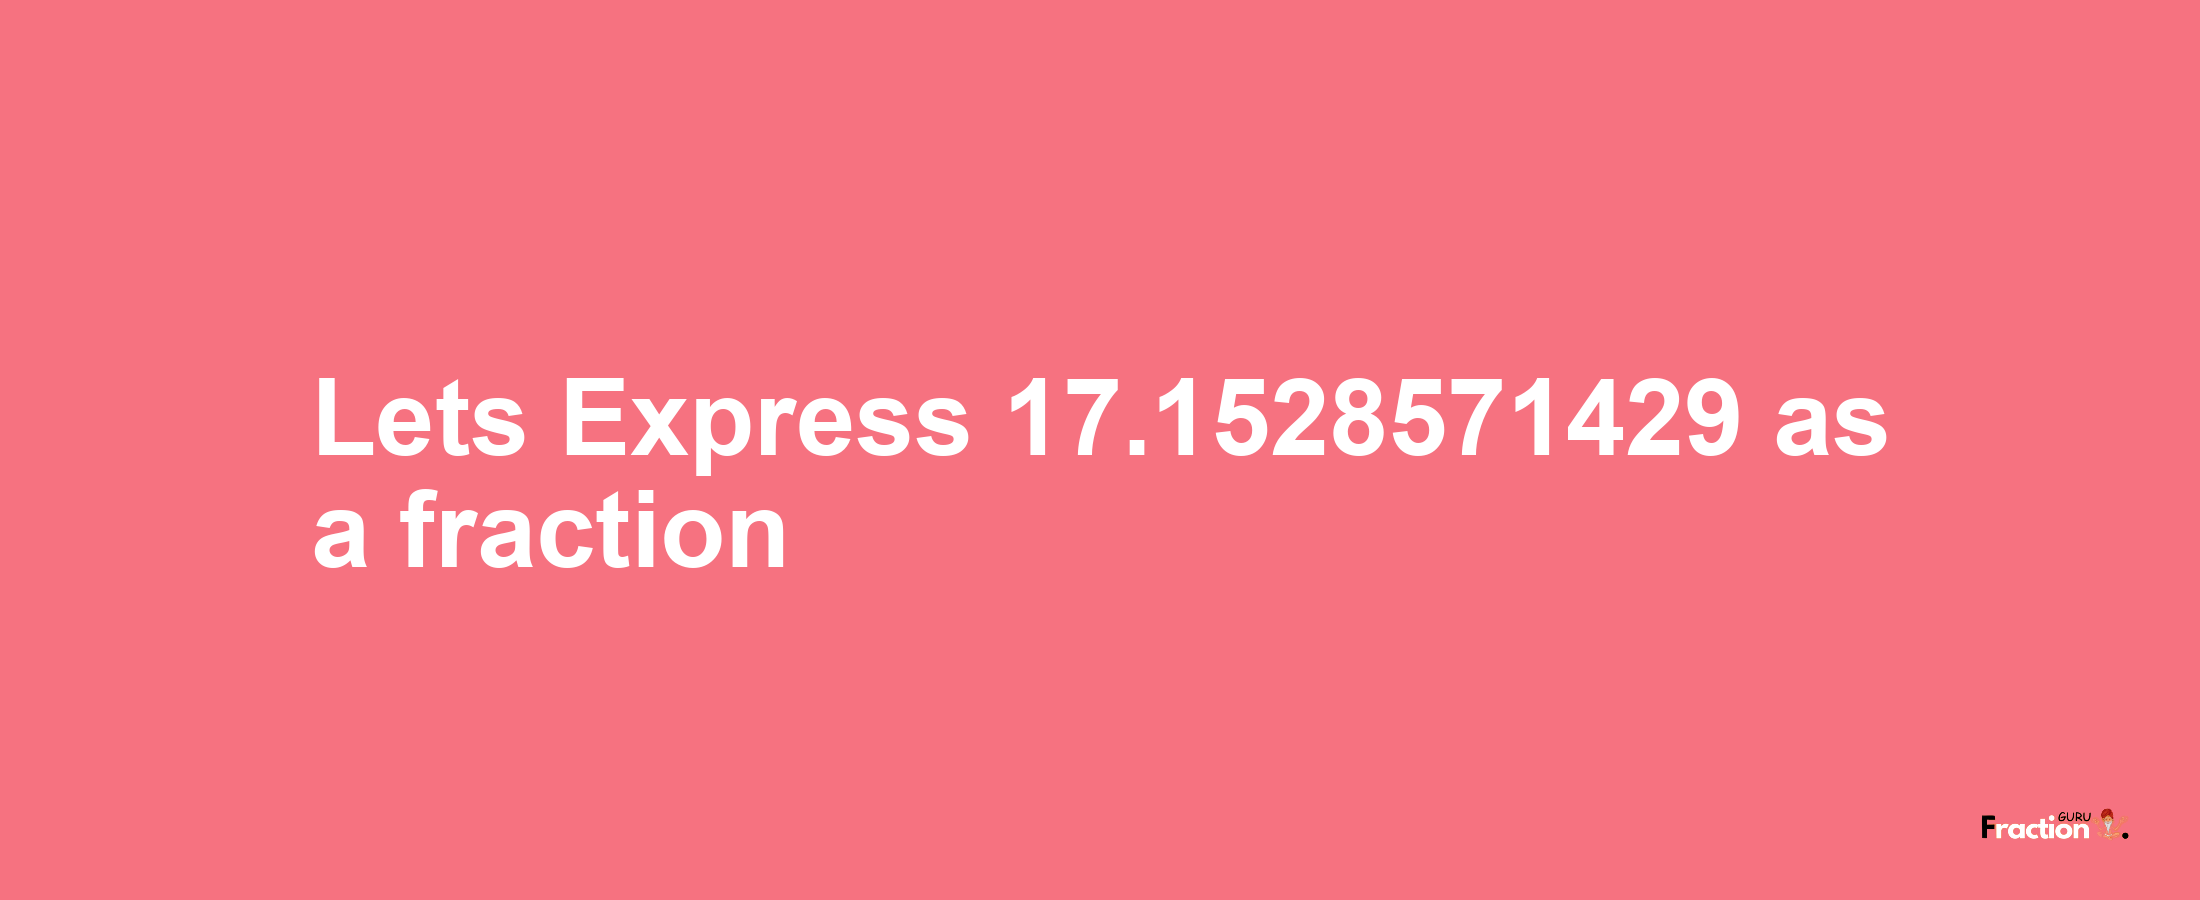 Lets Express 17.1528571429 as afraction